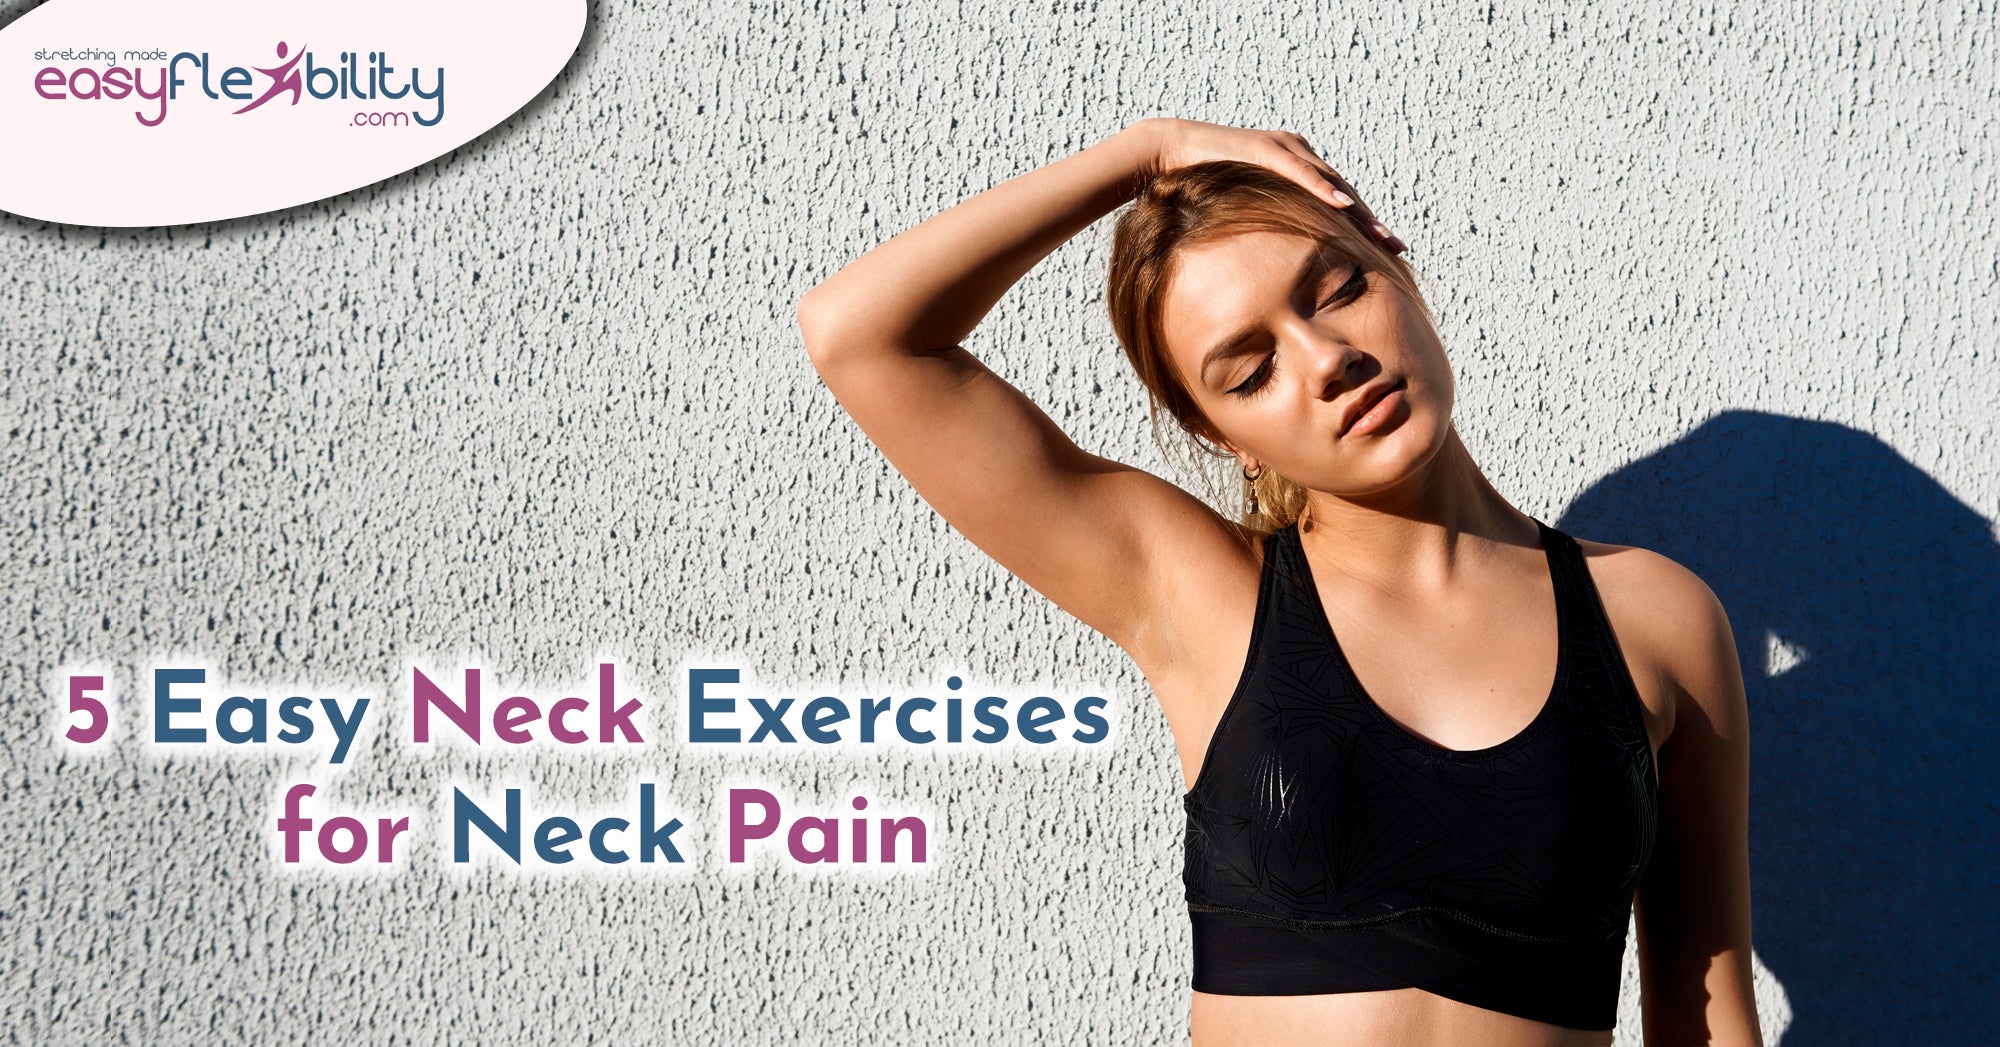 5 Easy Neck Exercises for Neck Pain